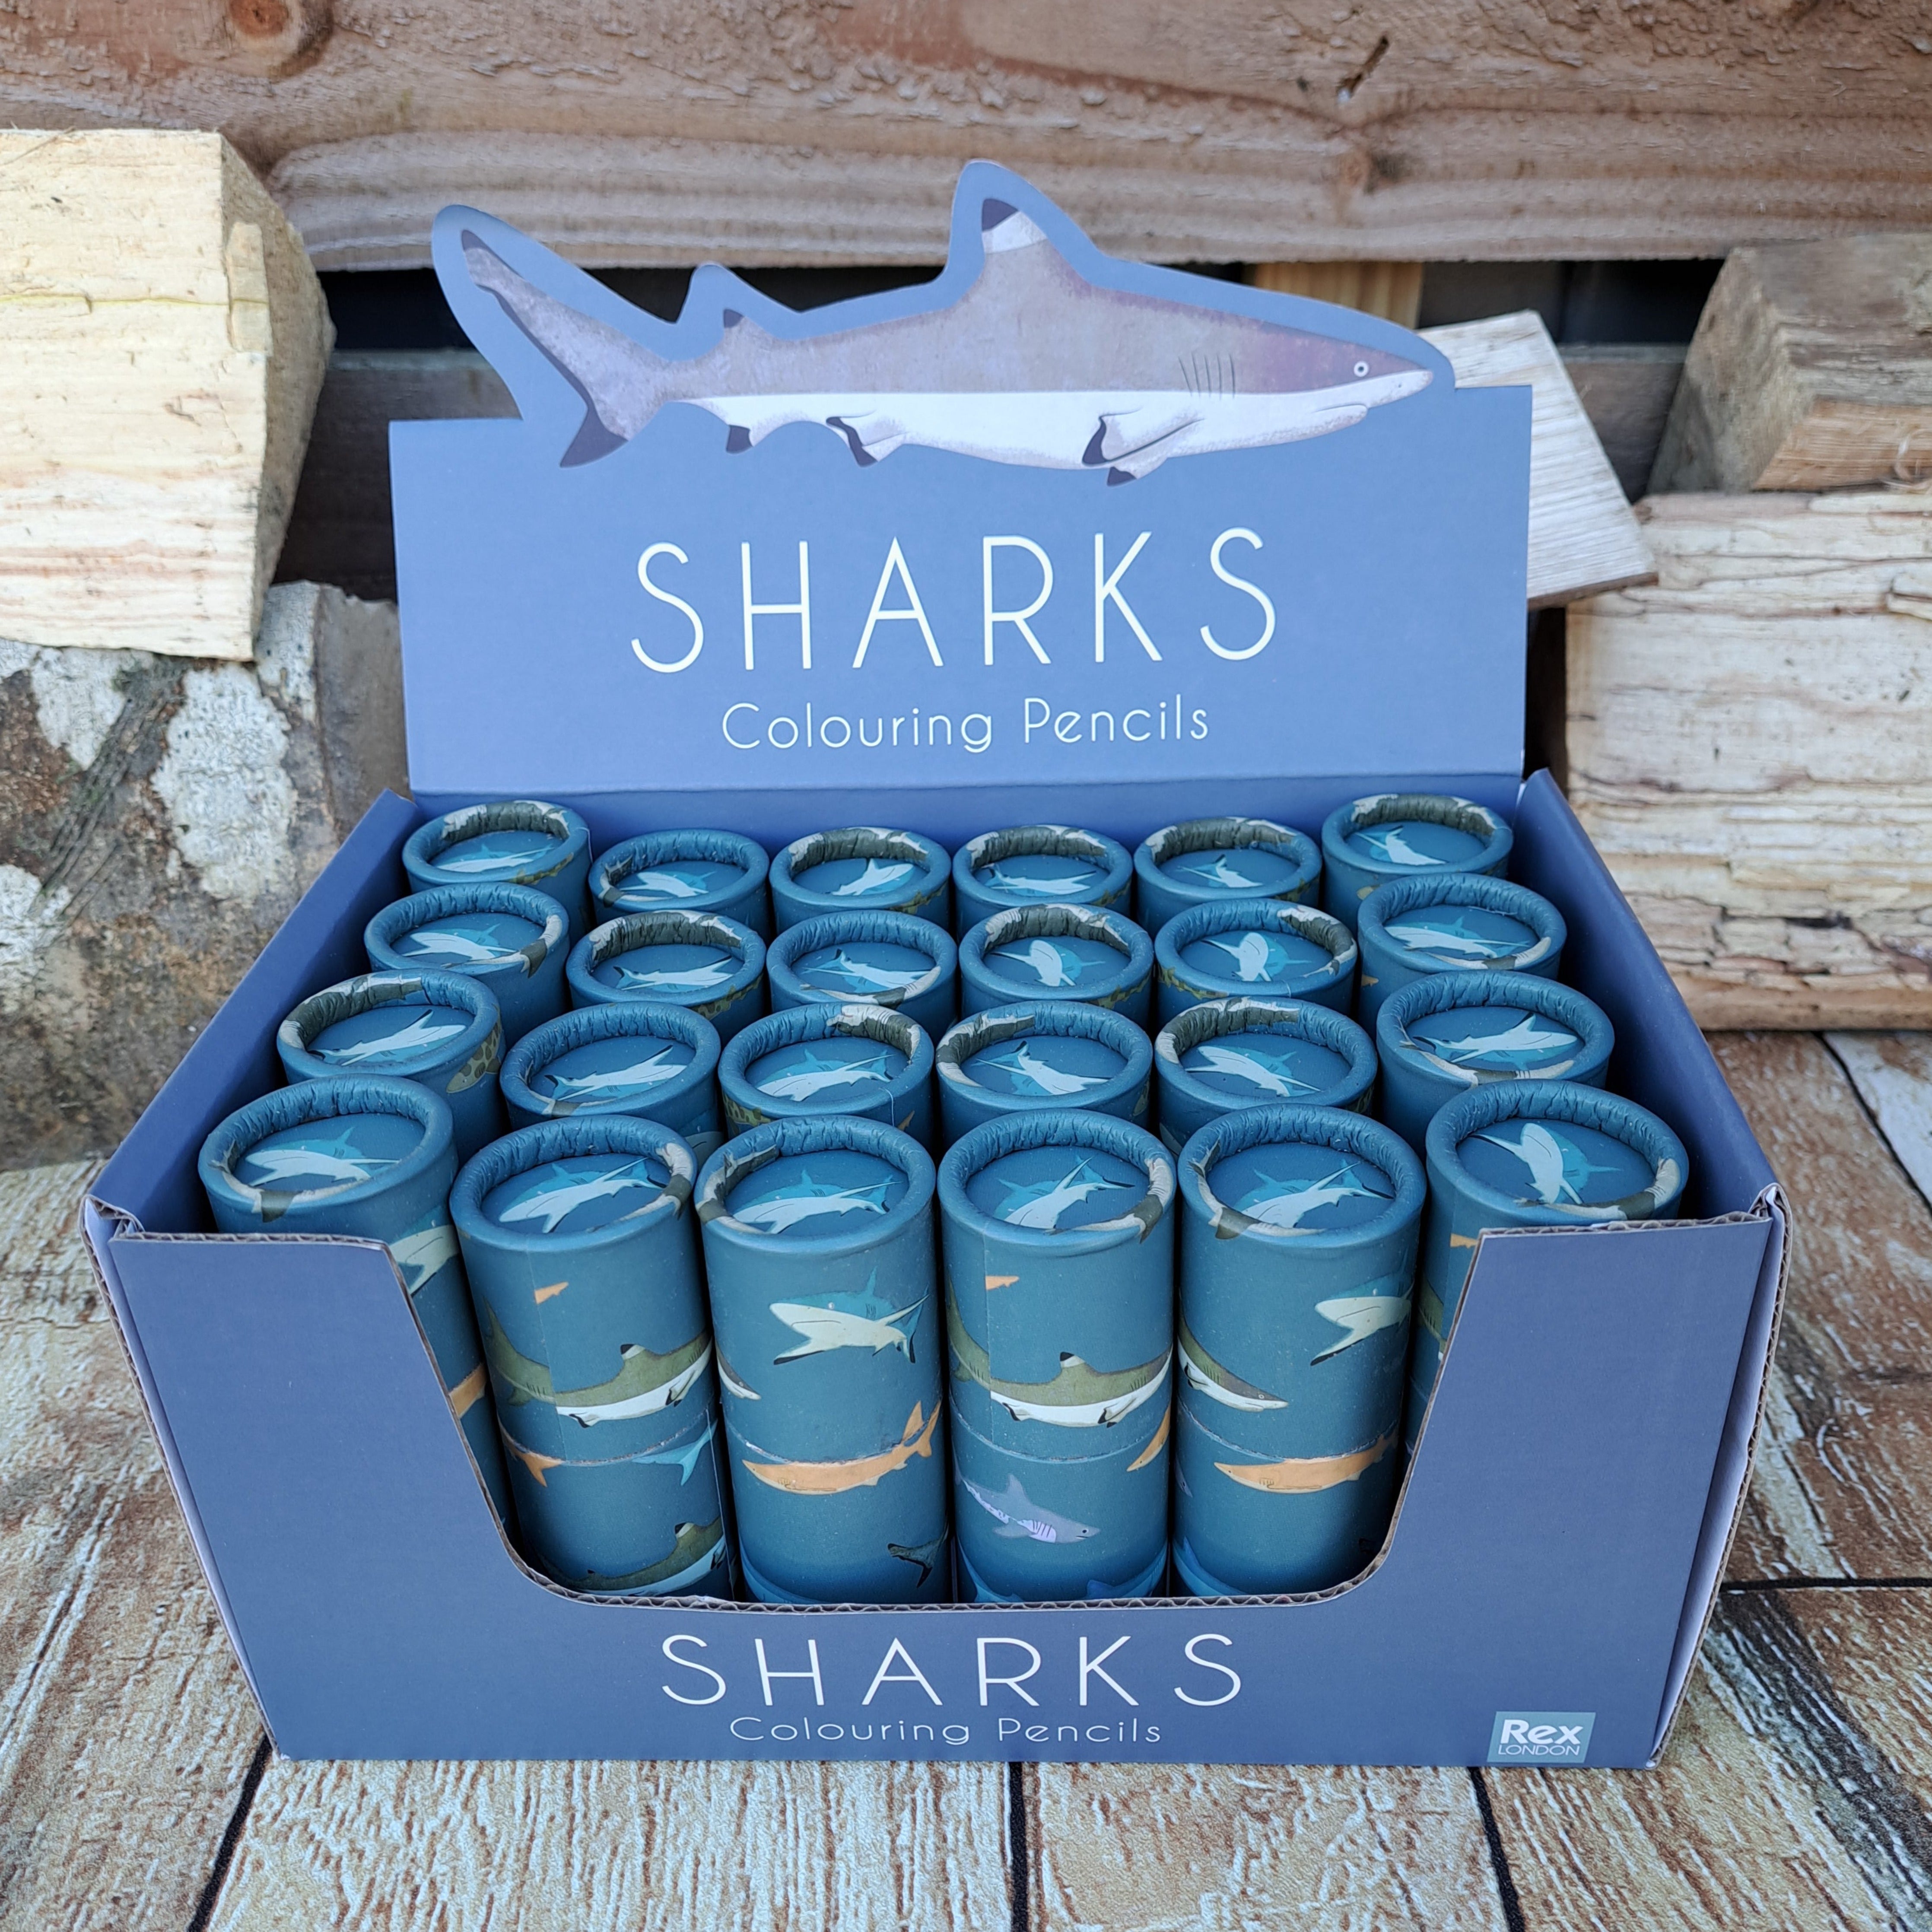 24 x Rex London Shark Colouring Pencils (Also available individually)